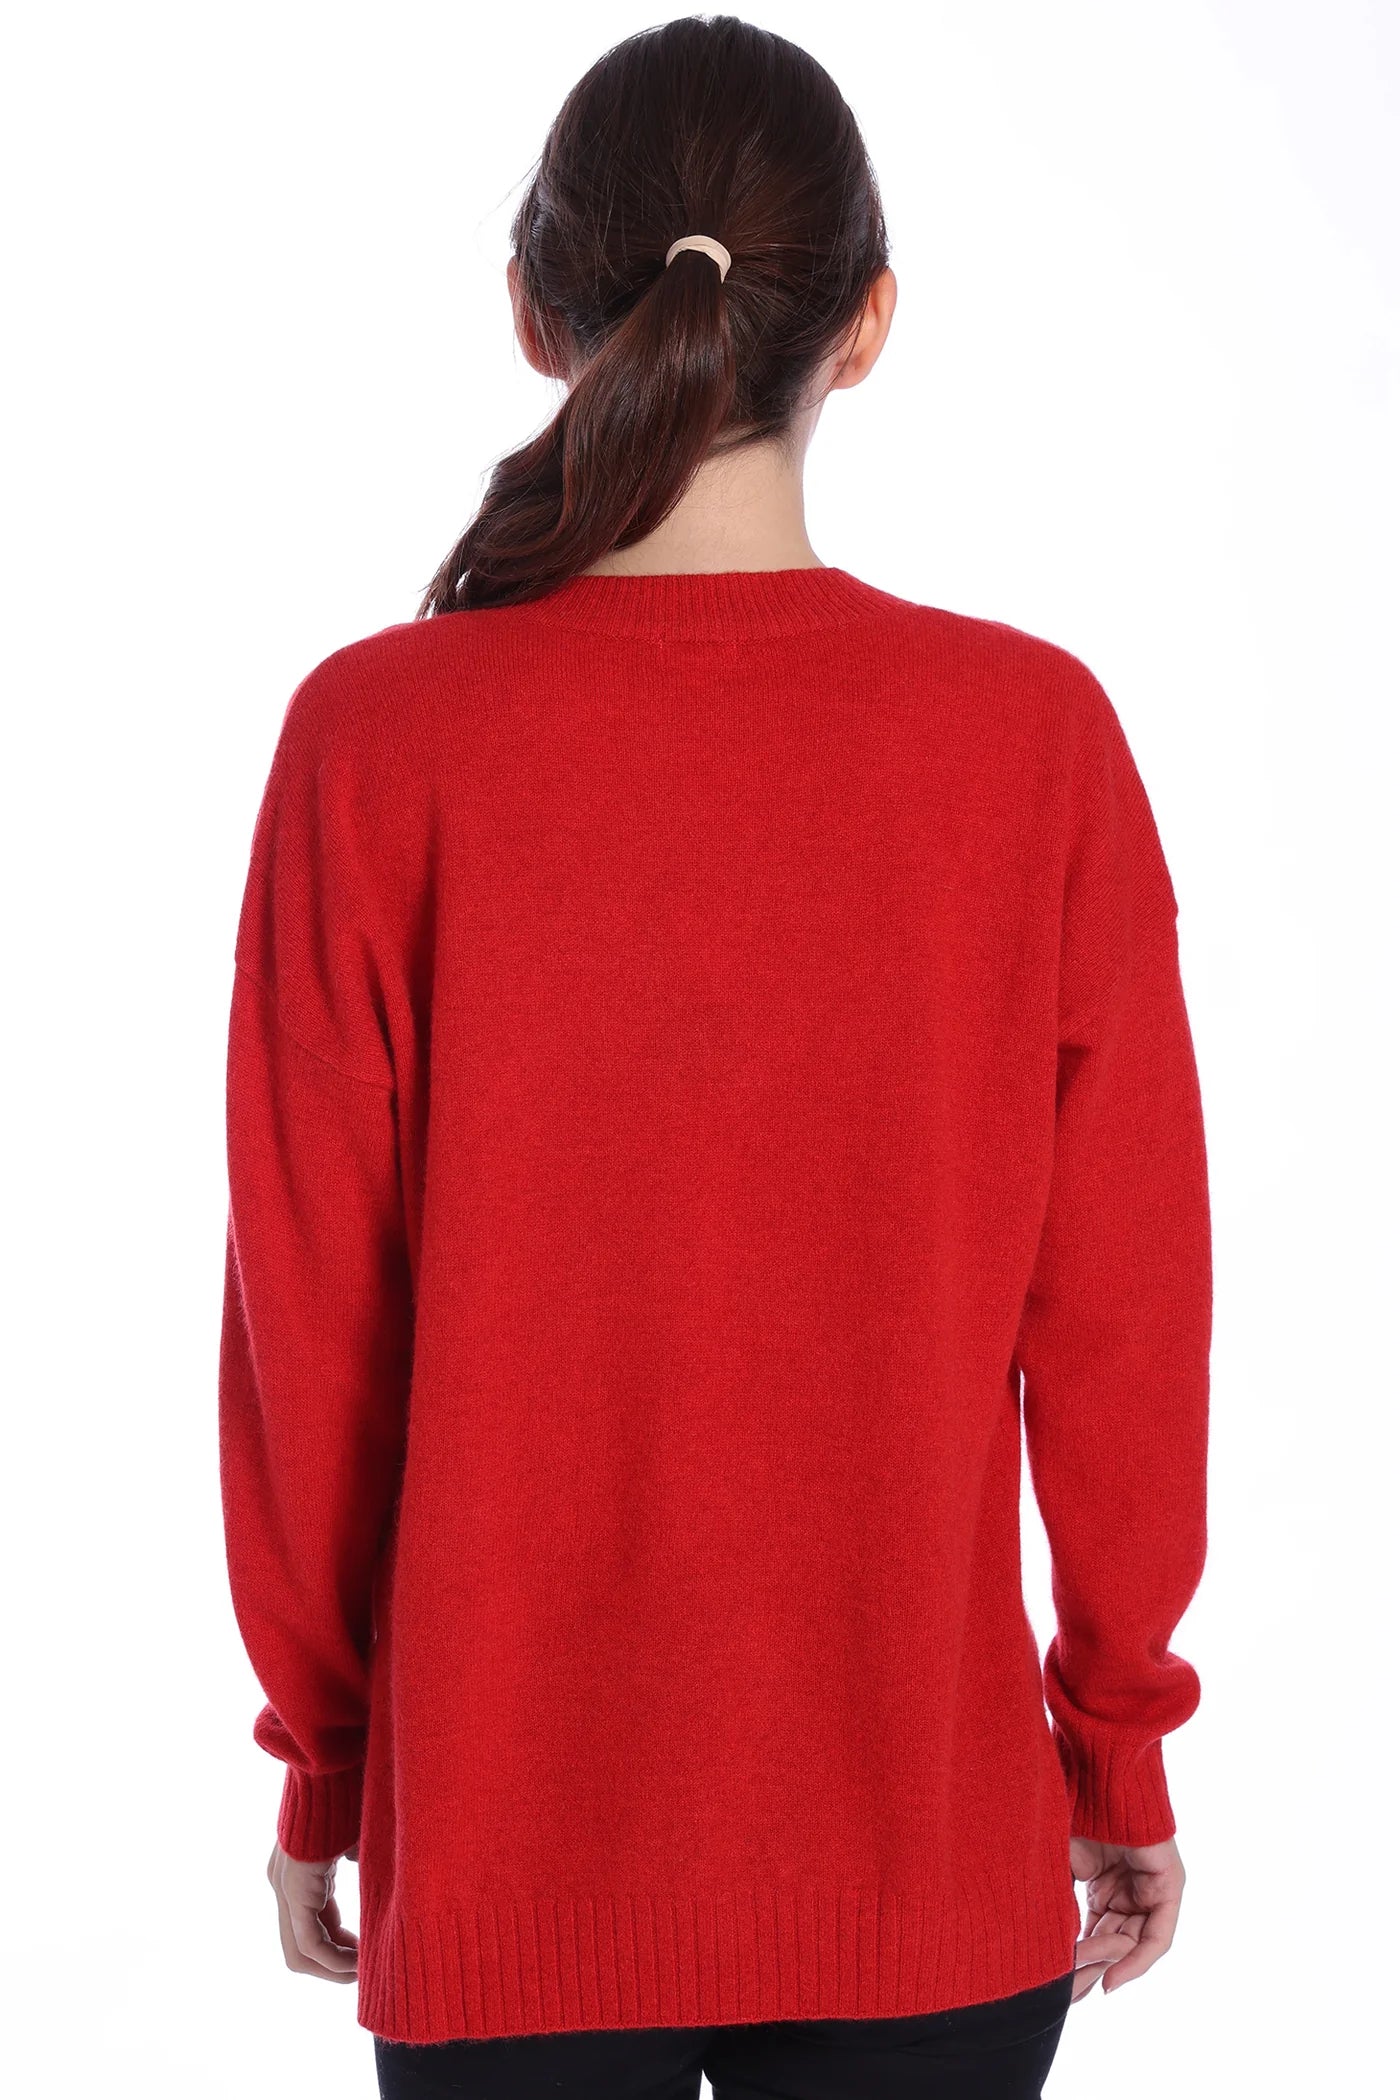 100% Cashmere Long and Lean V-Neck Sweater 7298 - Minnie Rose